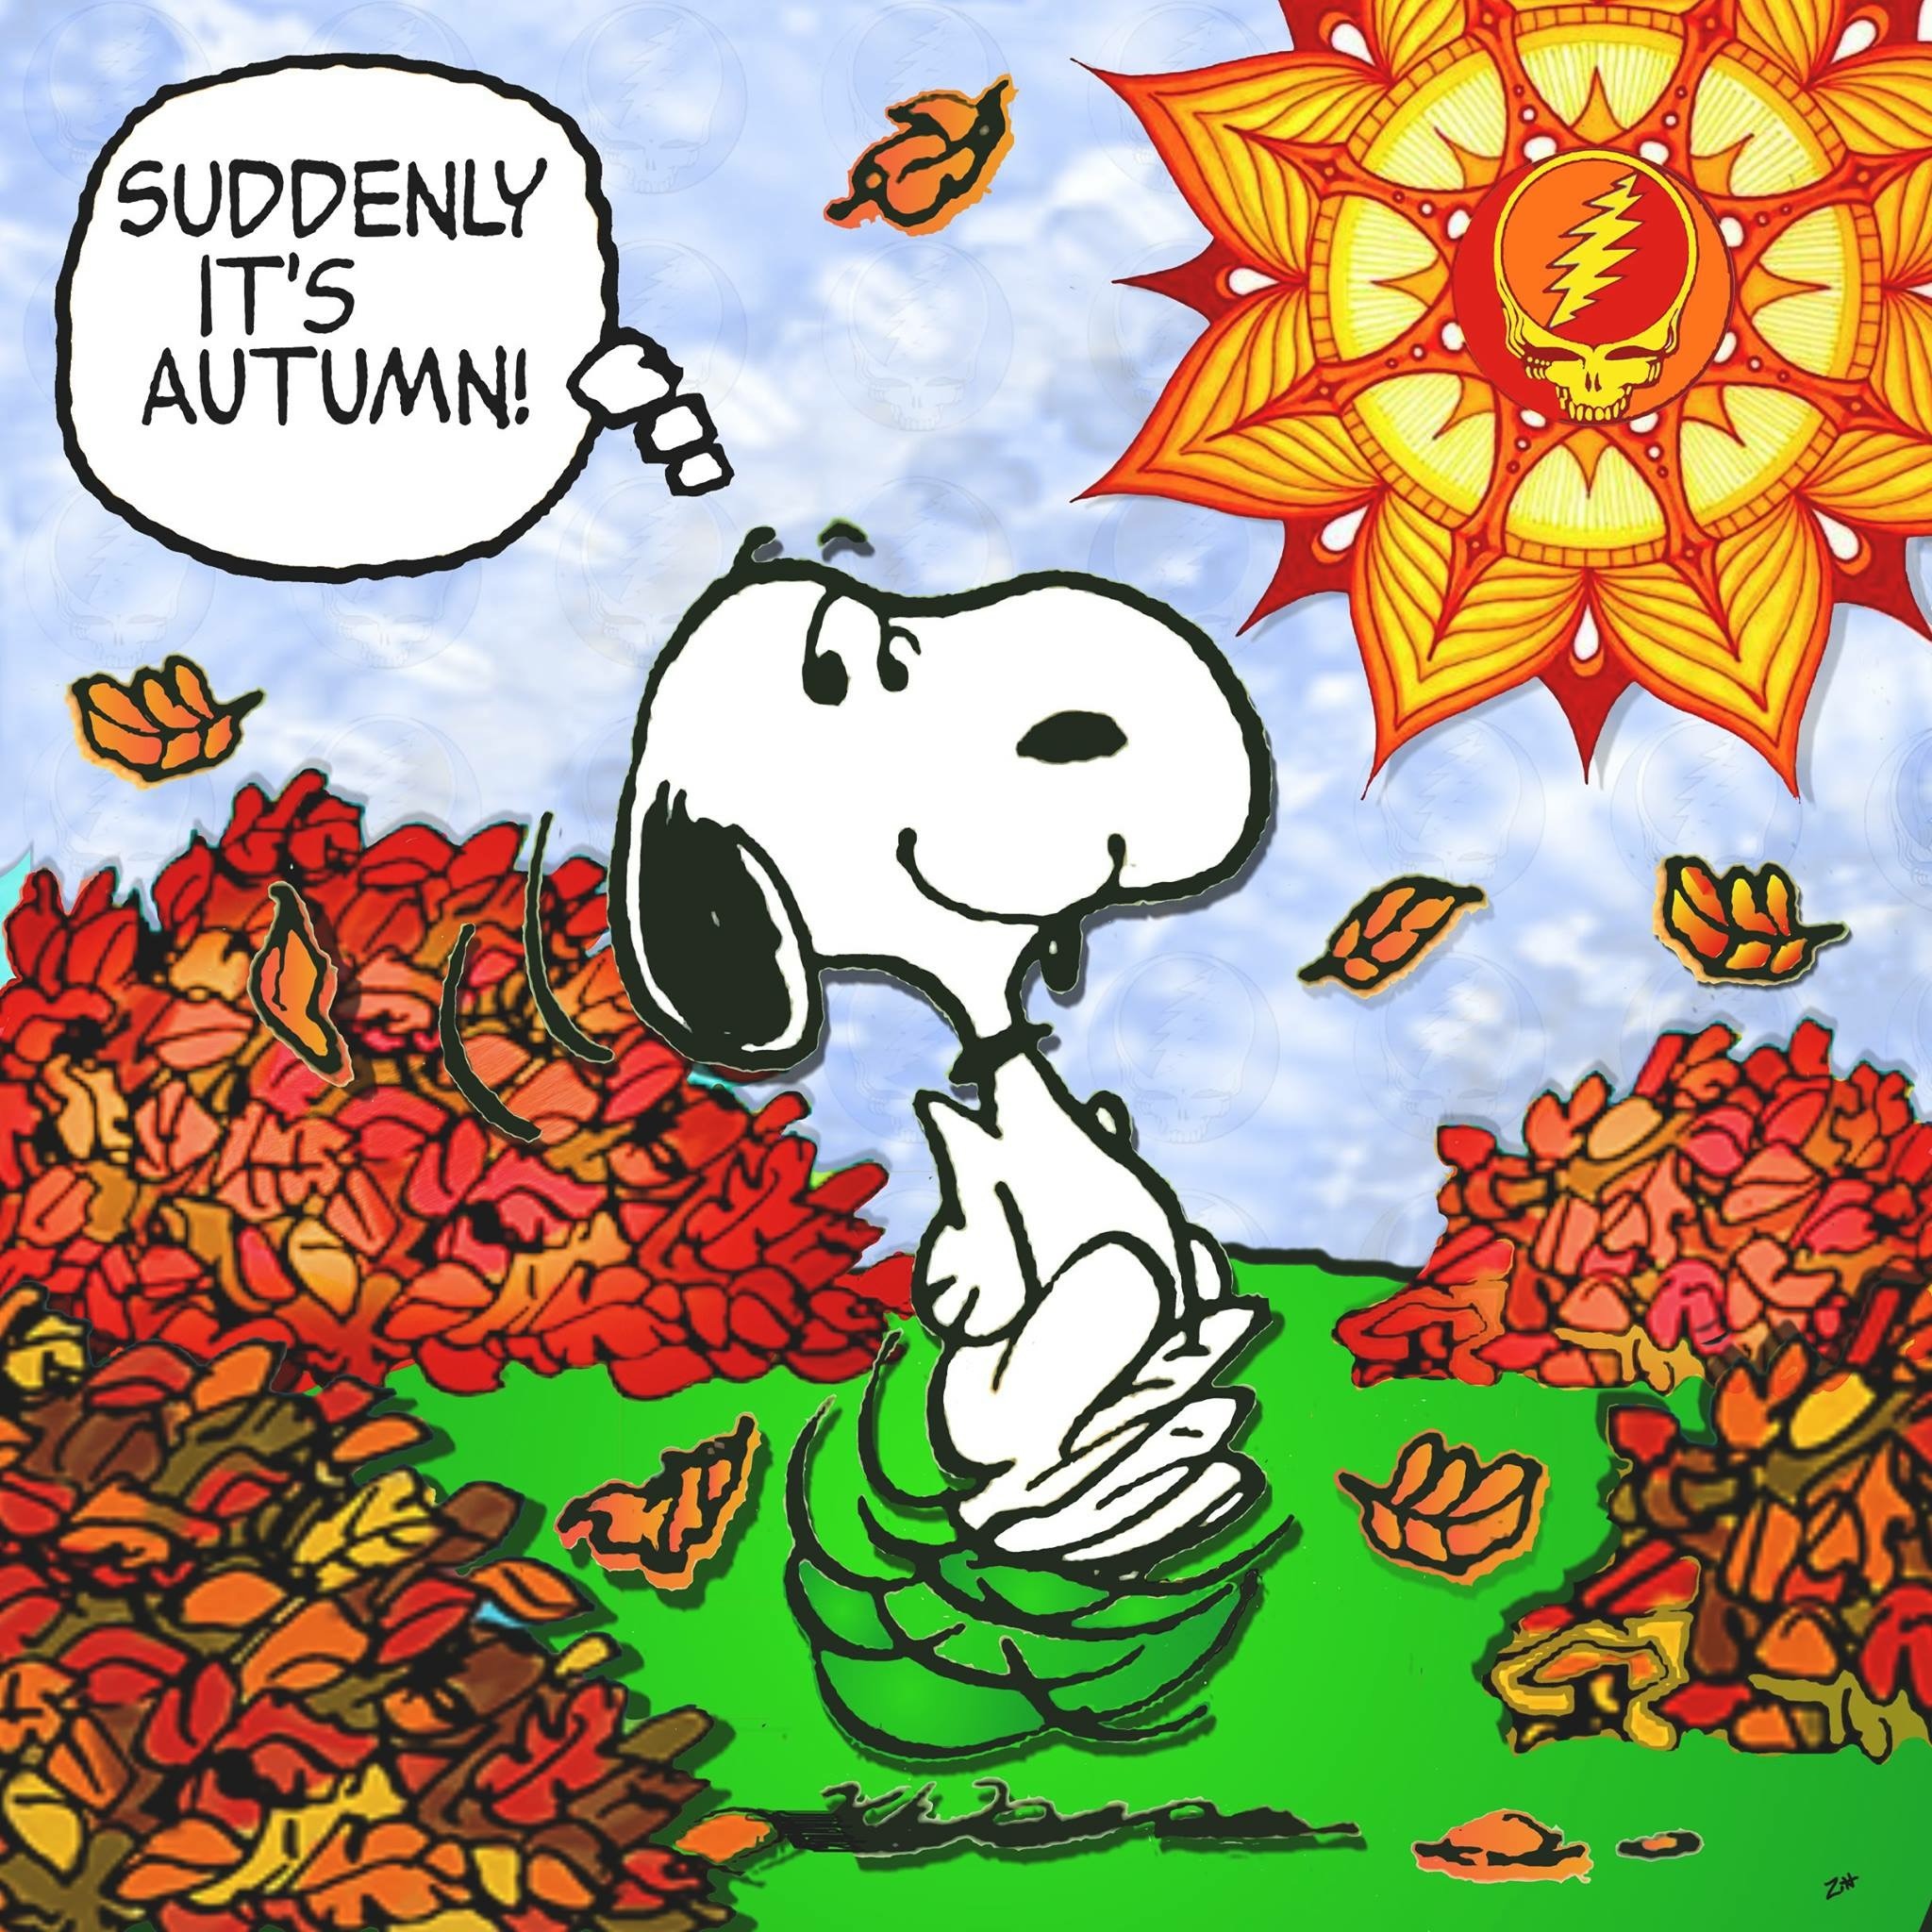 2048x2048 Music Albums, Grateful Dead, Snoopy, Peanuts, Twin, Posters, Autumn,  Charlie Brown, Spiritual